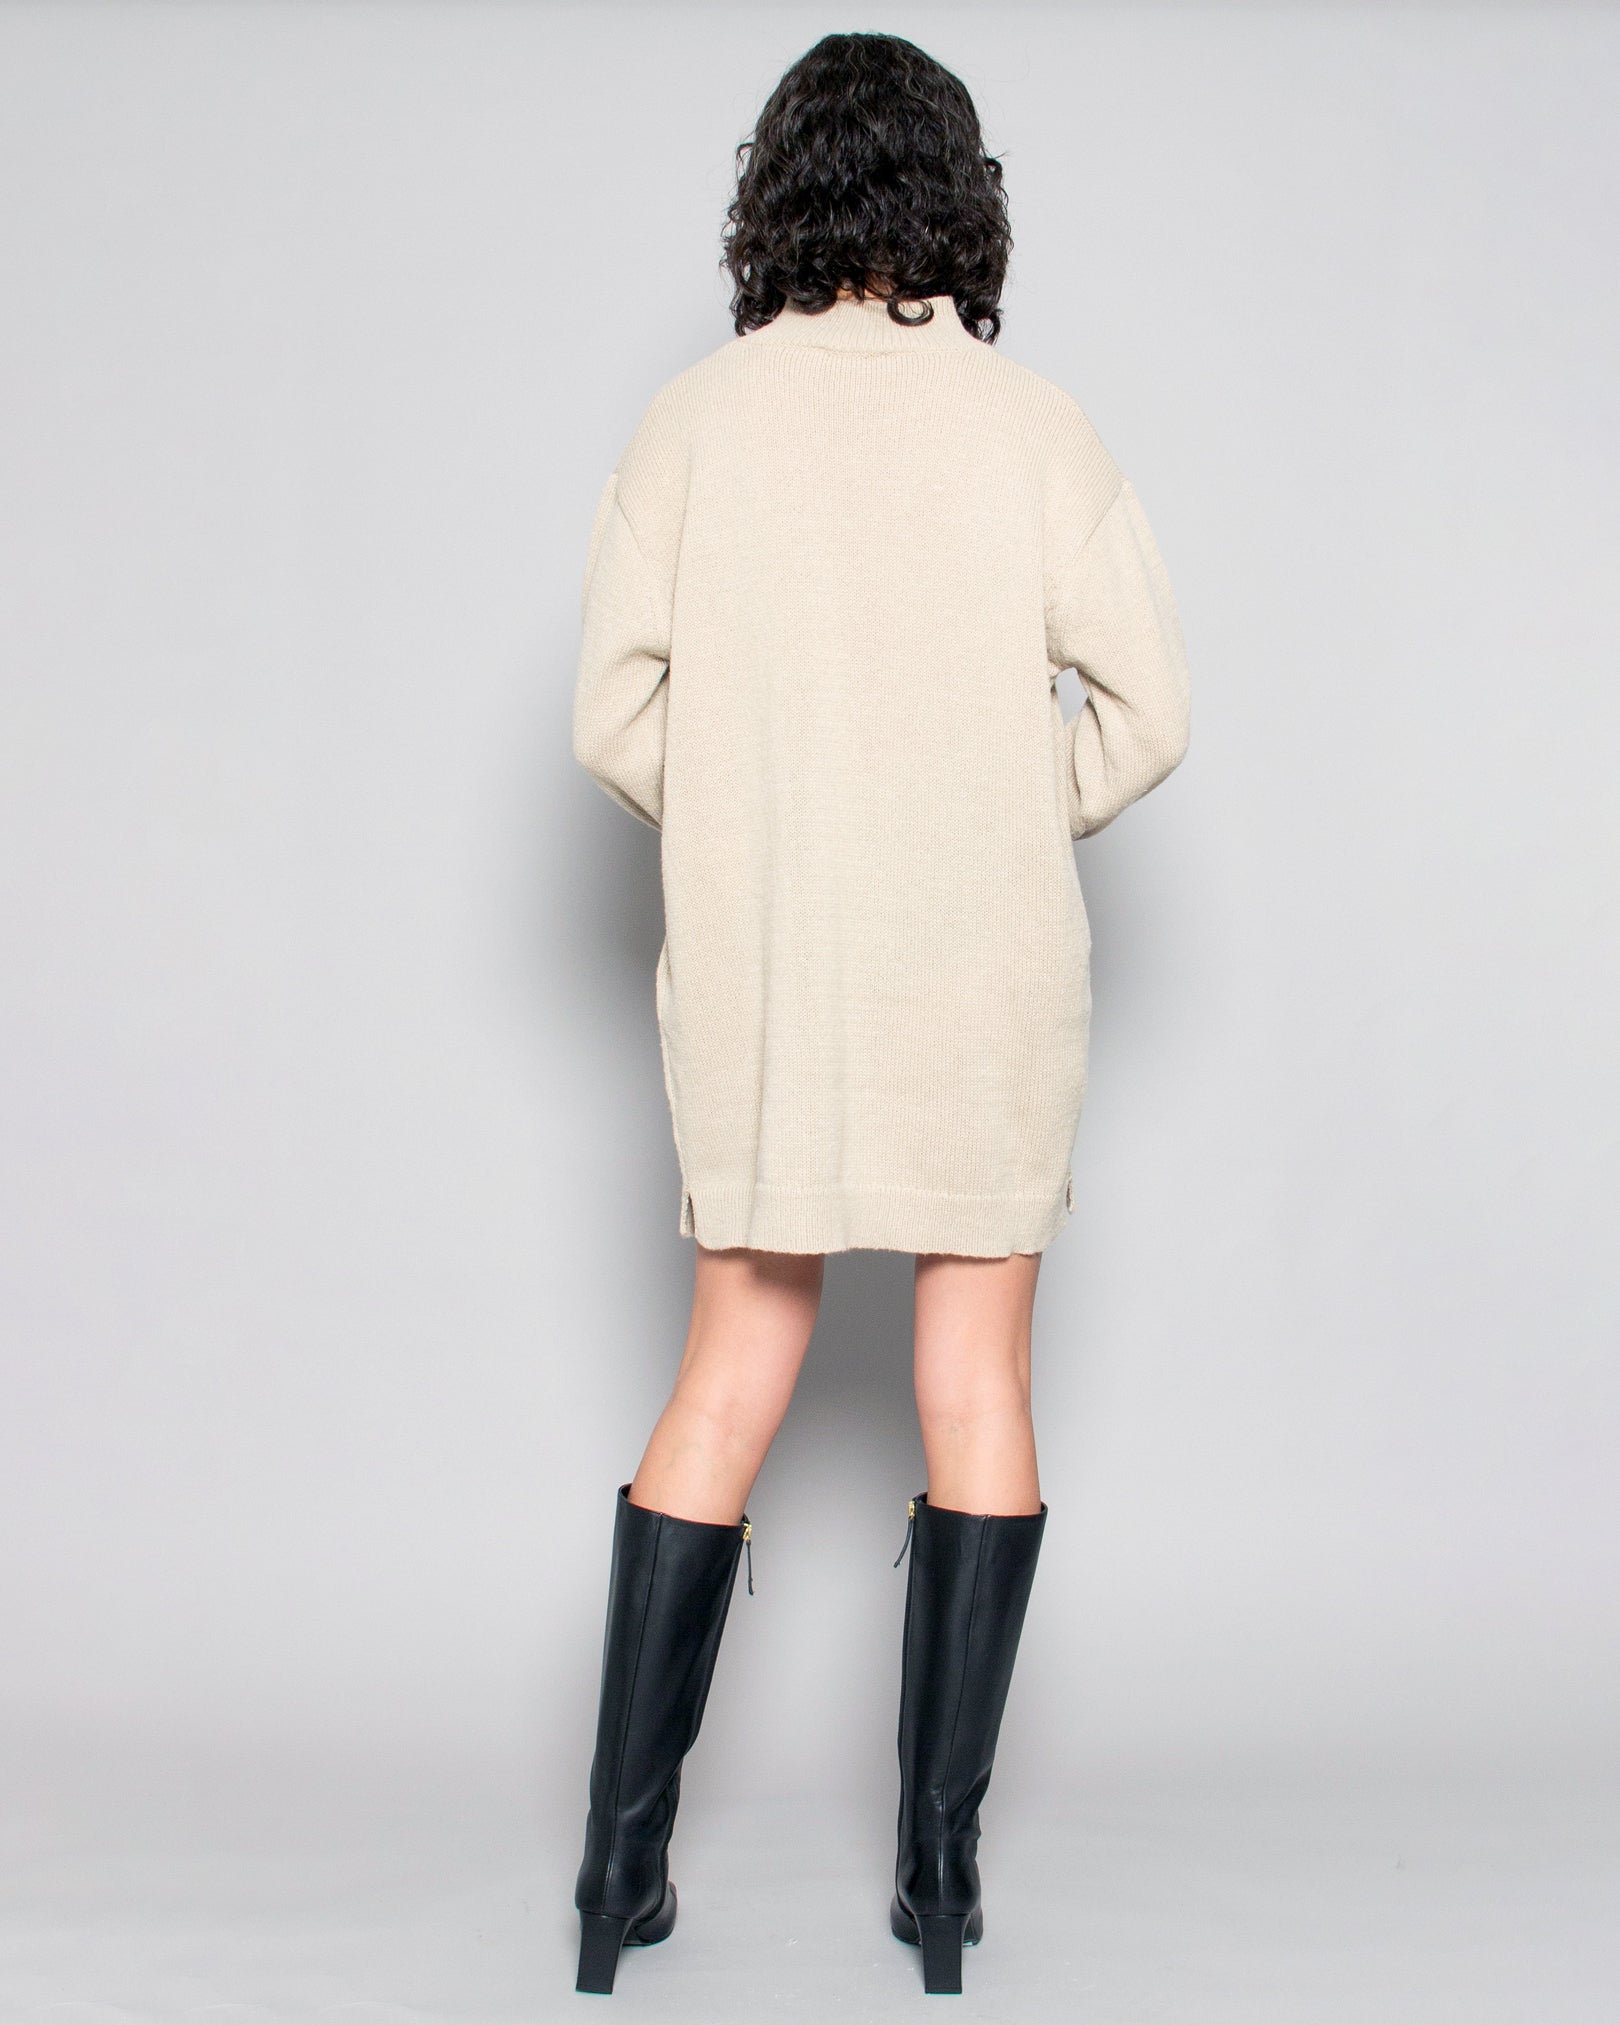 PERSONS Nia Mock Oversized Sweater Dress in Ecru available at Lahn.shop